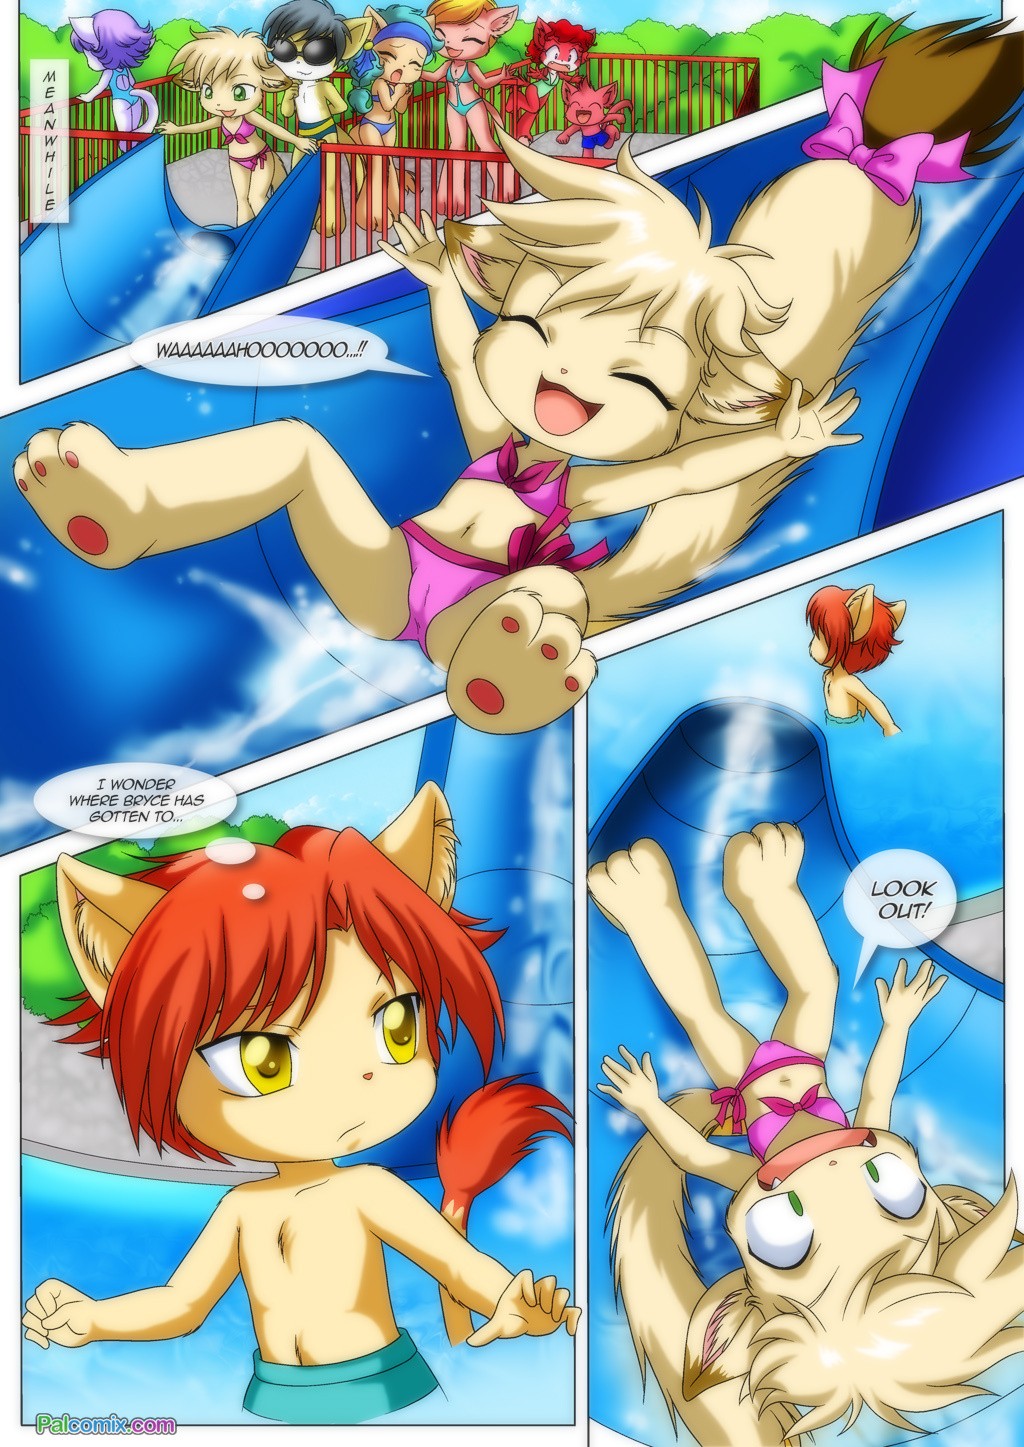 Little Tails 4: Cherry Blossom Girl porn comic picture 15